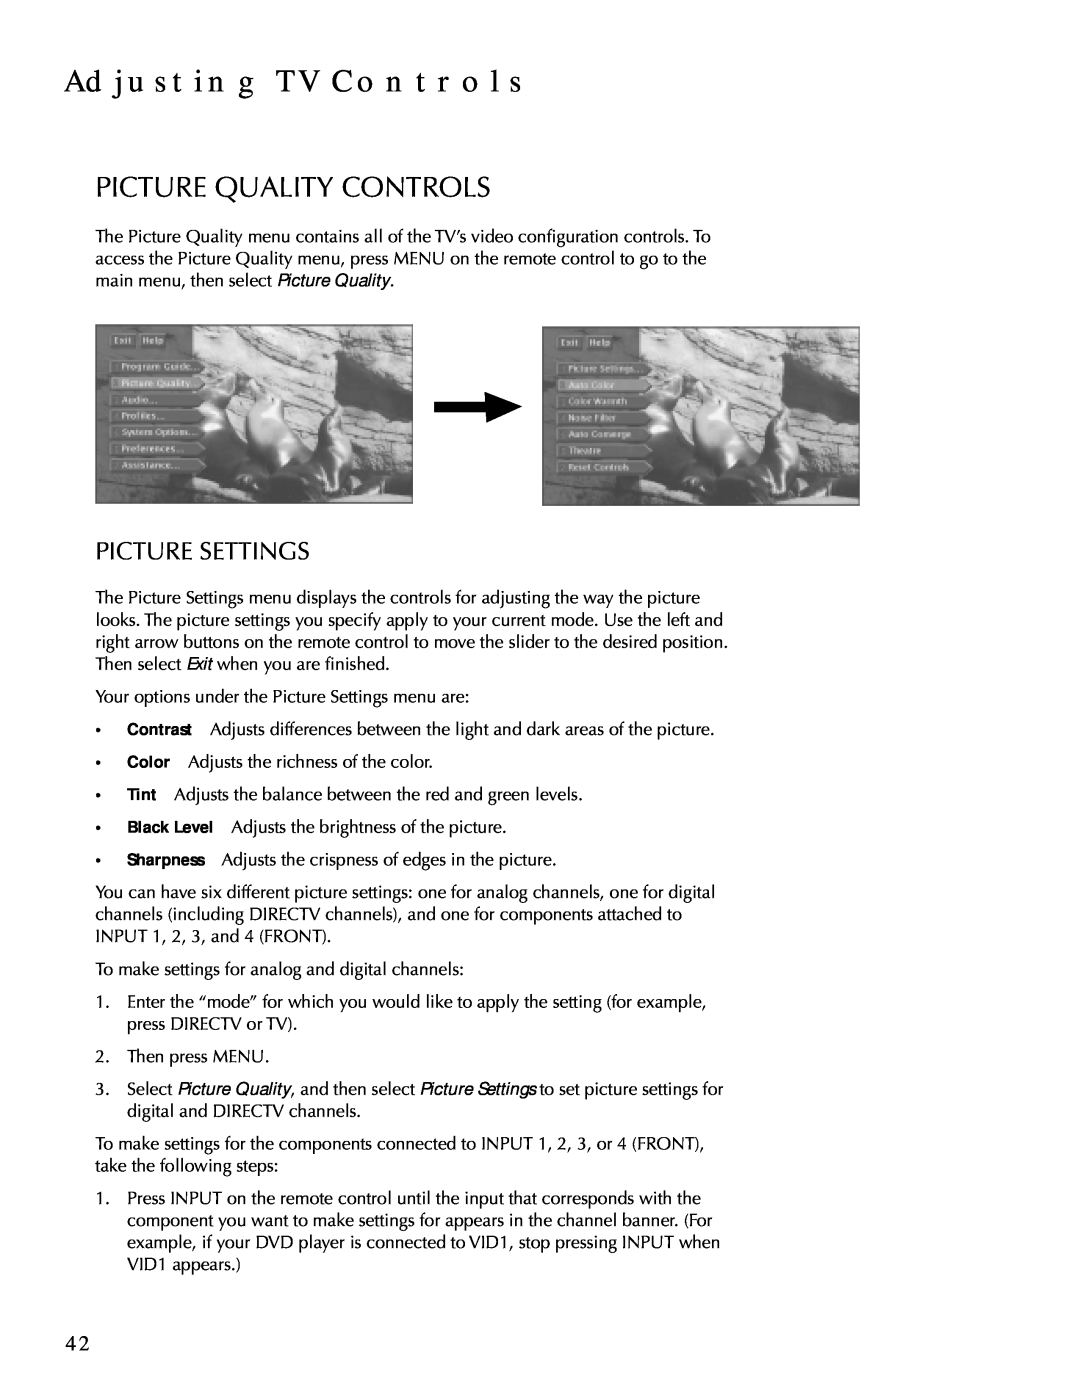 DirecTV HDTV user manual Adjusting Tv Controls, Picture Quality Controls, Picture Settings 